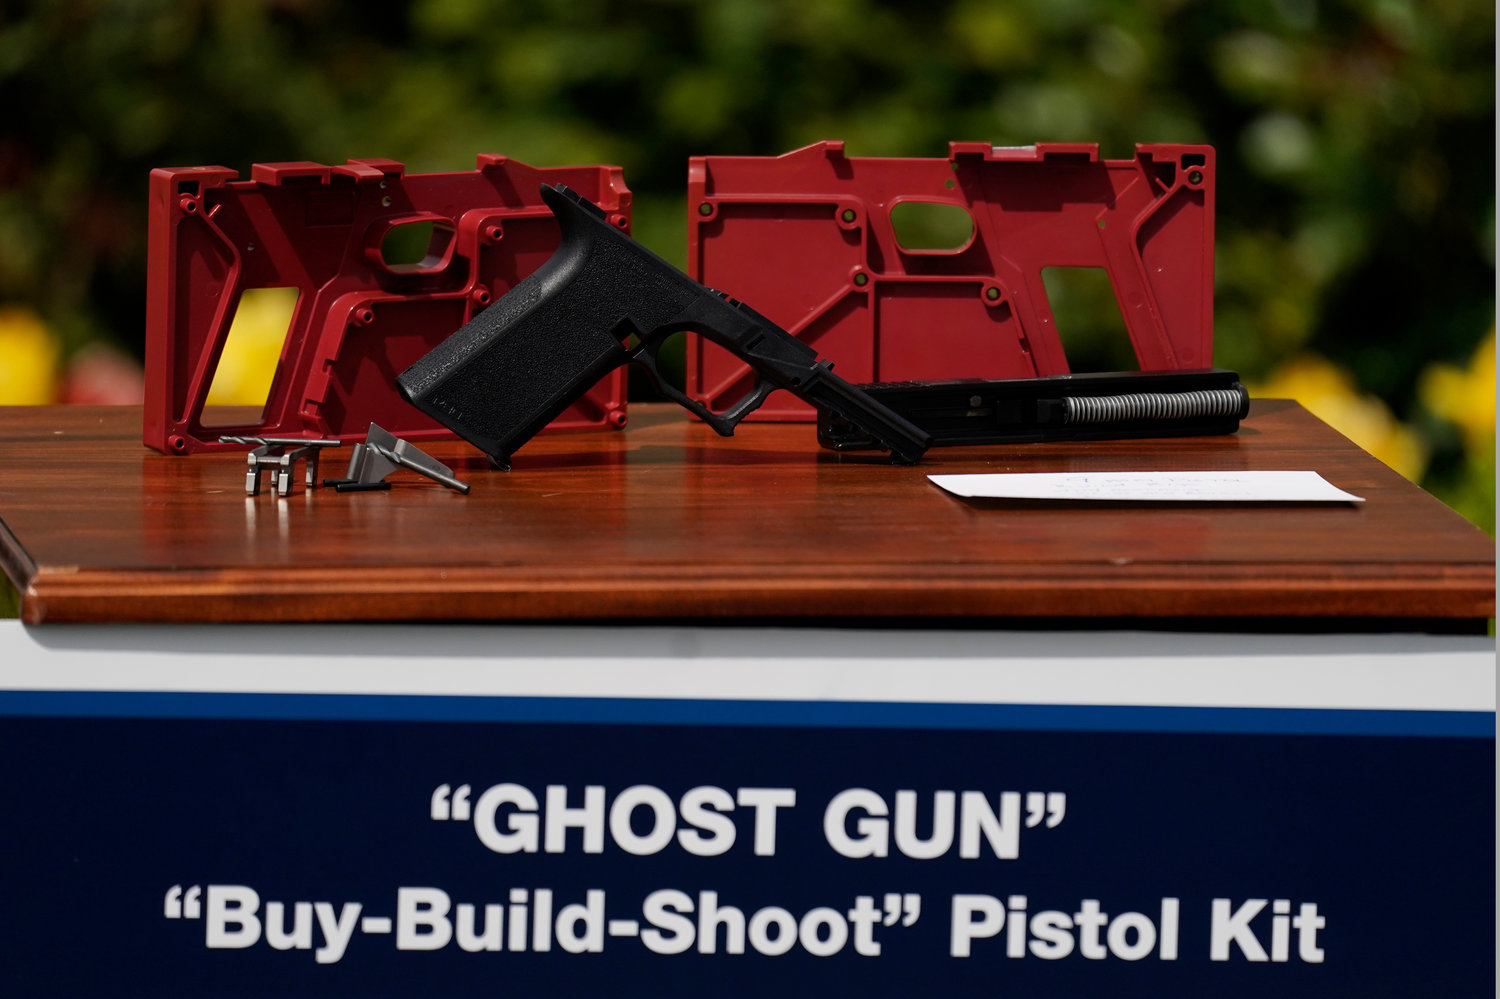 A 9mm pistol build kit with a commercial slide and barrel with a polymer frame is displayed during an event in the Rose Garden of the White House in Washington, Monday, April 11, 2022. President Joe Biden announced a final version of its ghost gun rule, which comes with the White House and the Justice Department under growing pressure to crack down on gun deaths..